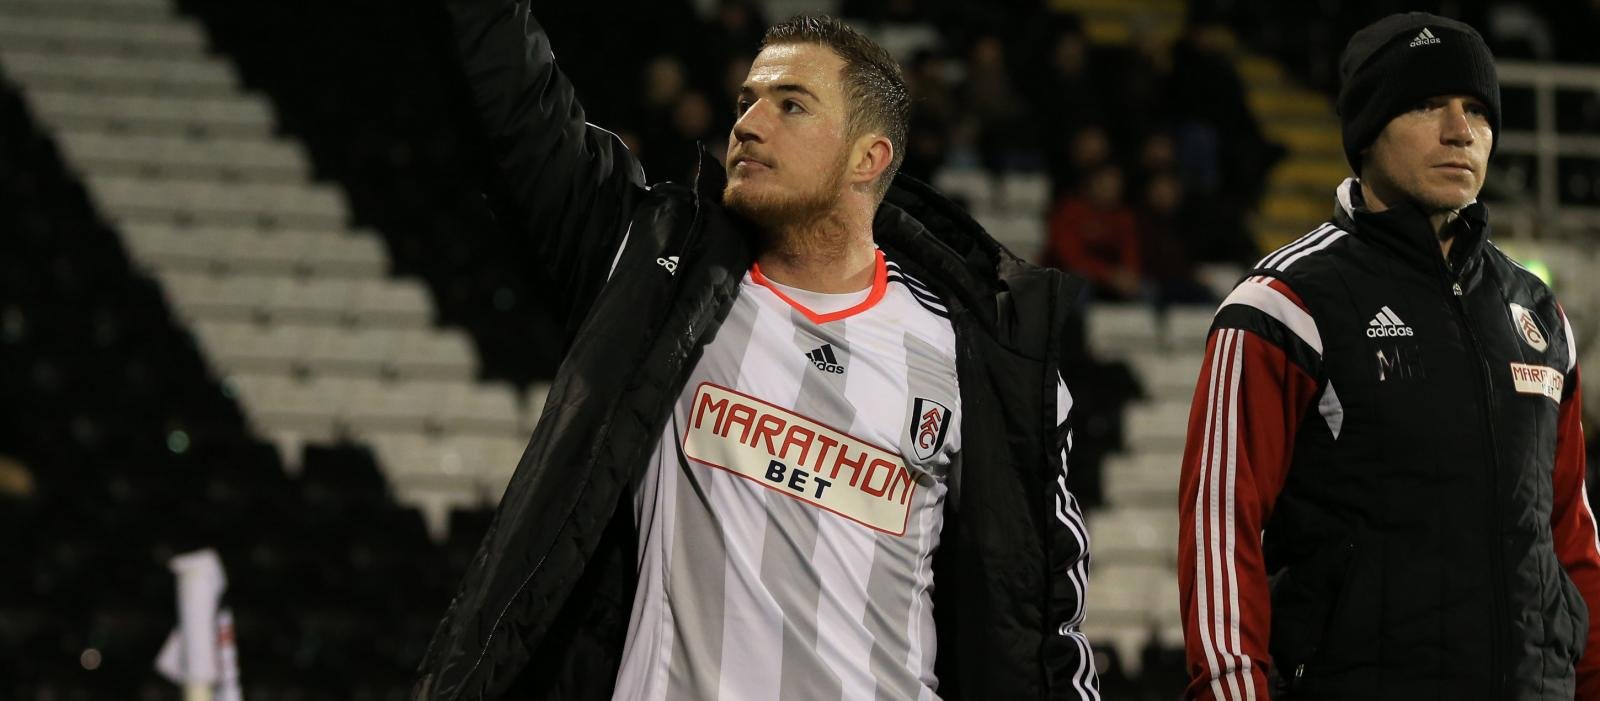 Sheffield Wednesday, Newcastle United and Aston Villa chasing Fulham’s £12m-rated star striker